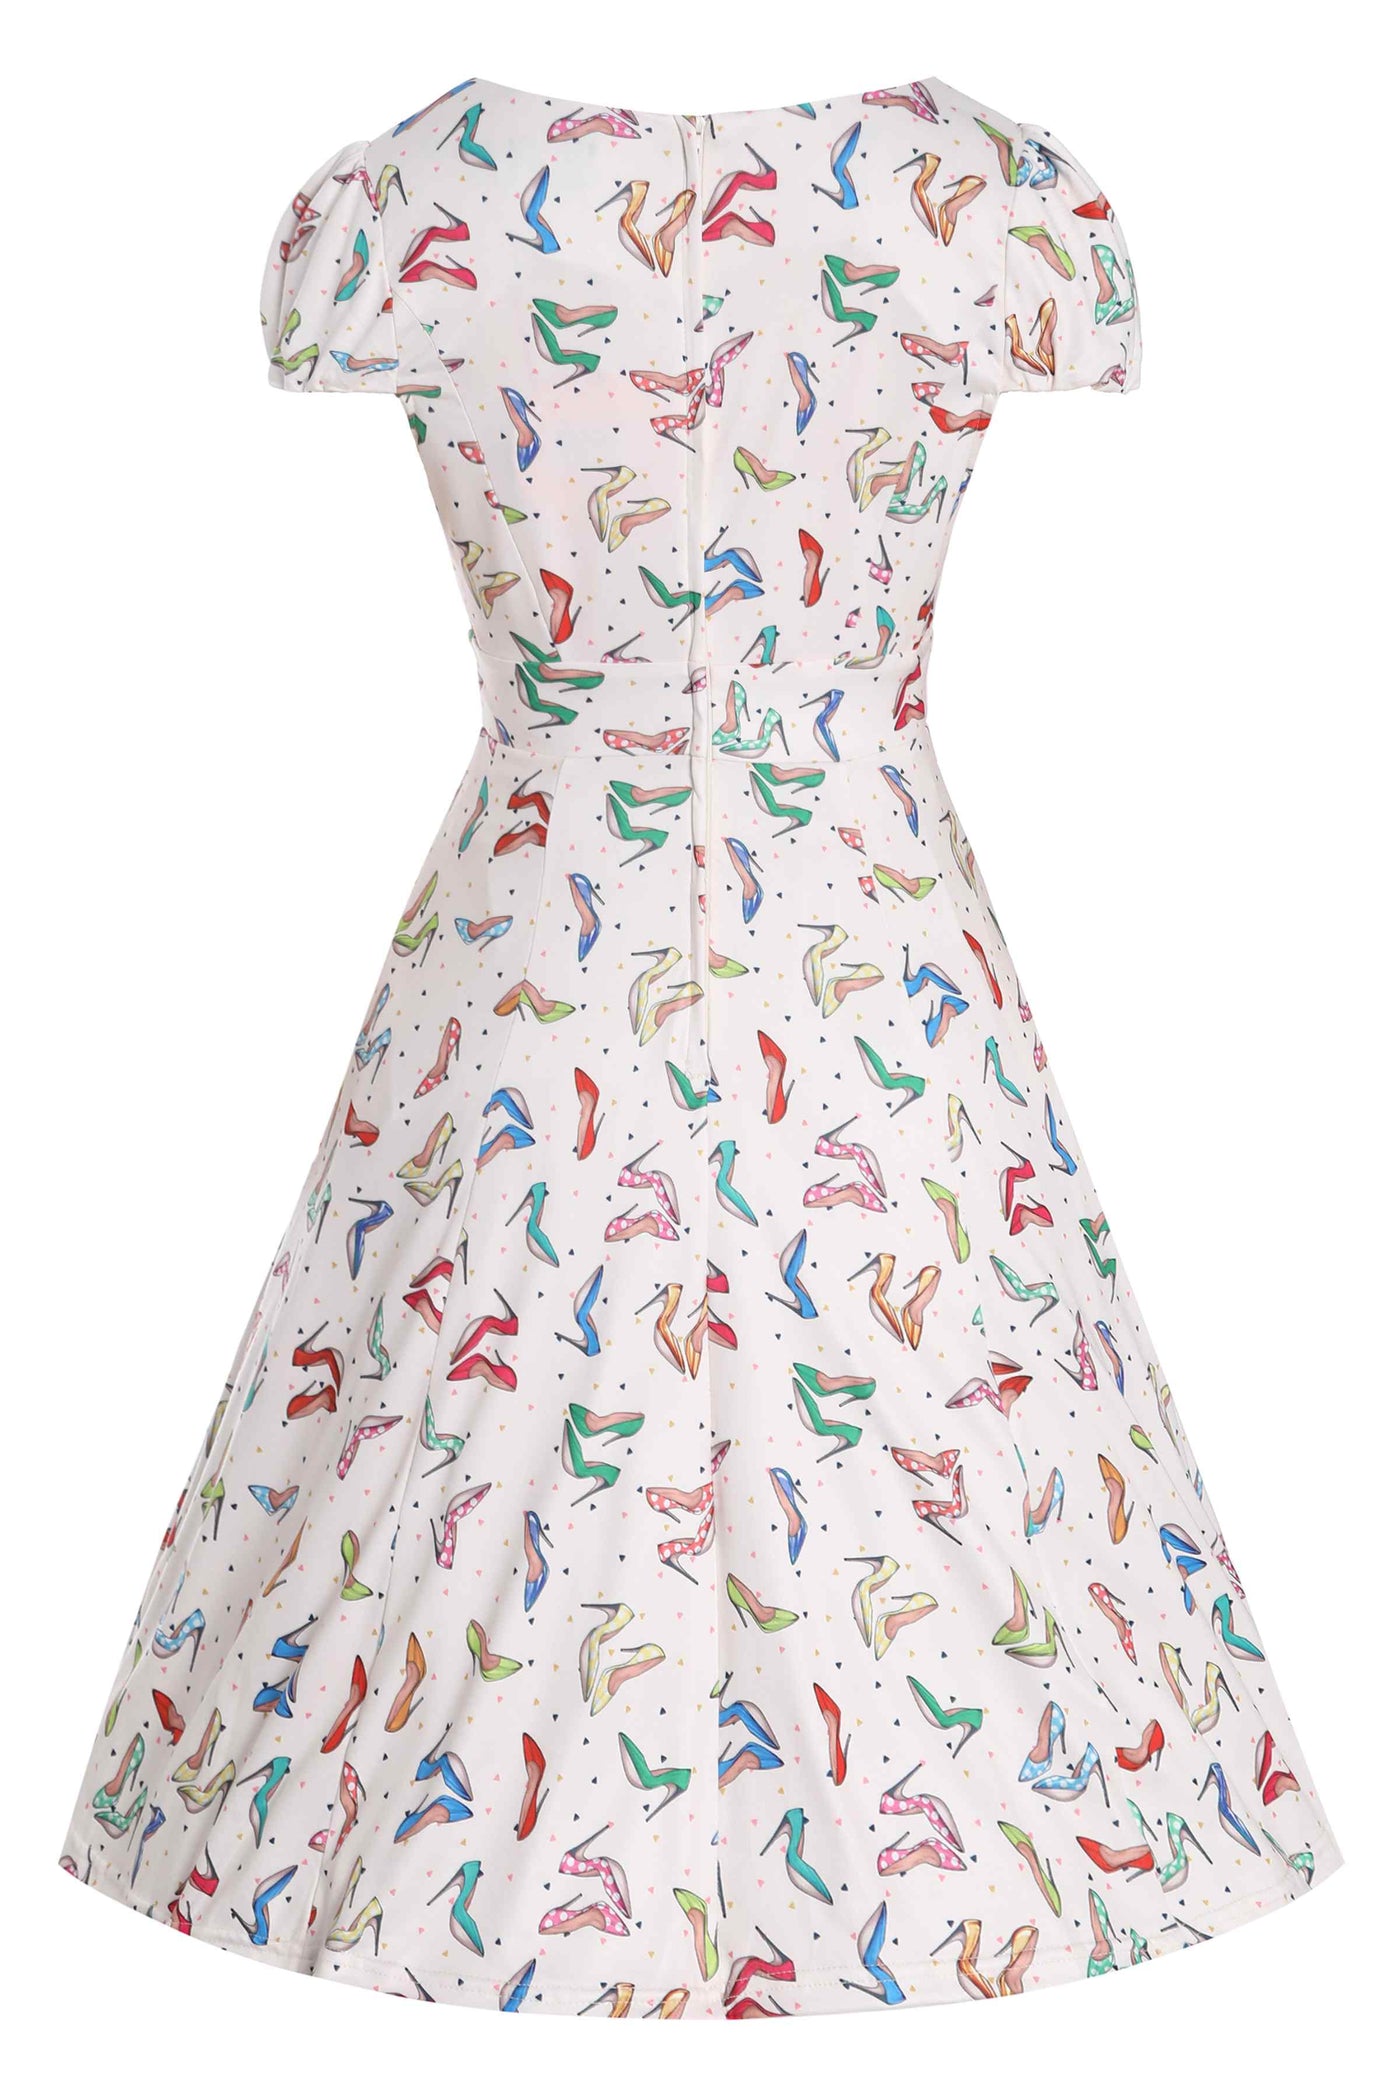 Back View of Stiletto Print Cap Sleeved Swing Dress in Cream